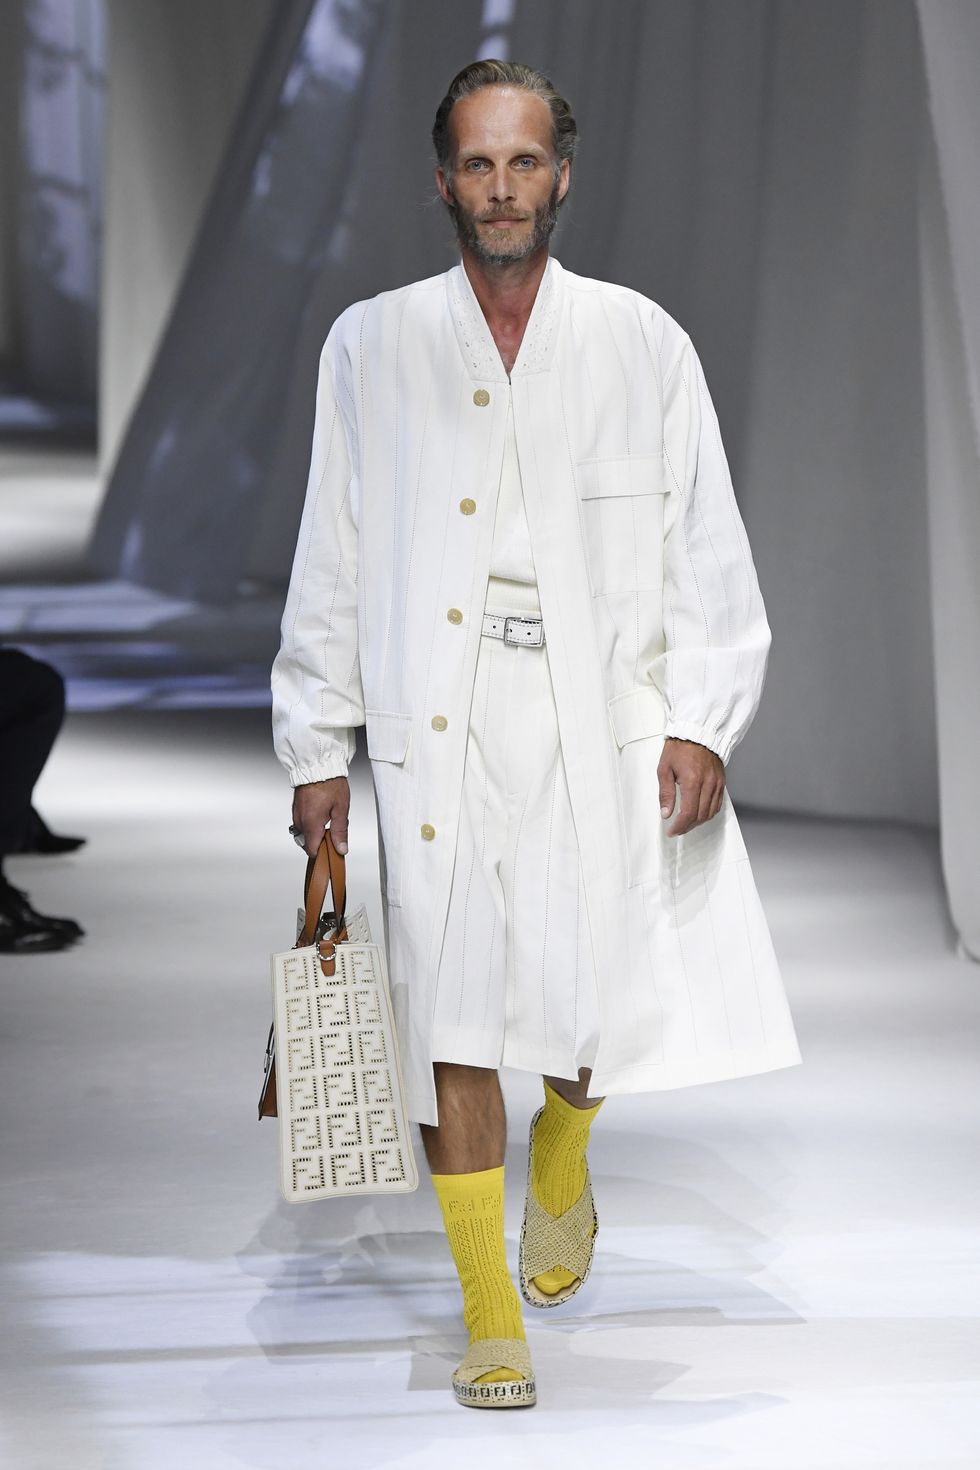 Fendi Spring 2021 Collection Images - Fendi's Runway Show Reflects On ...